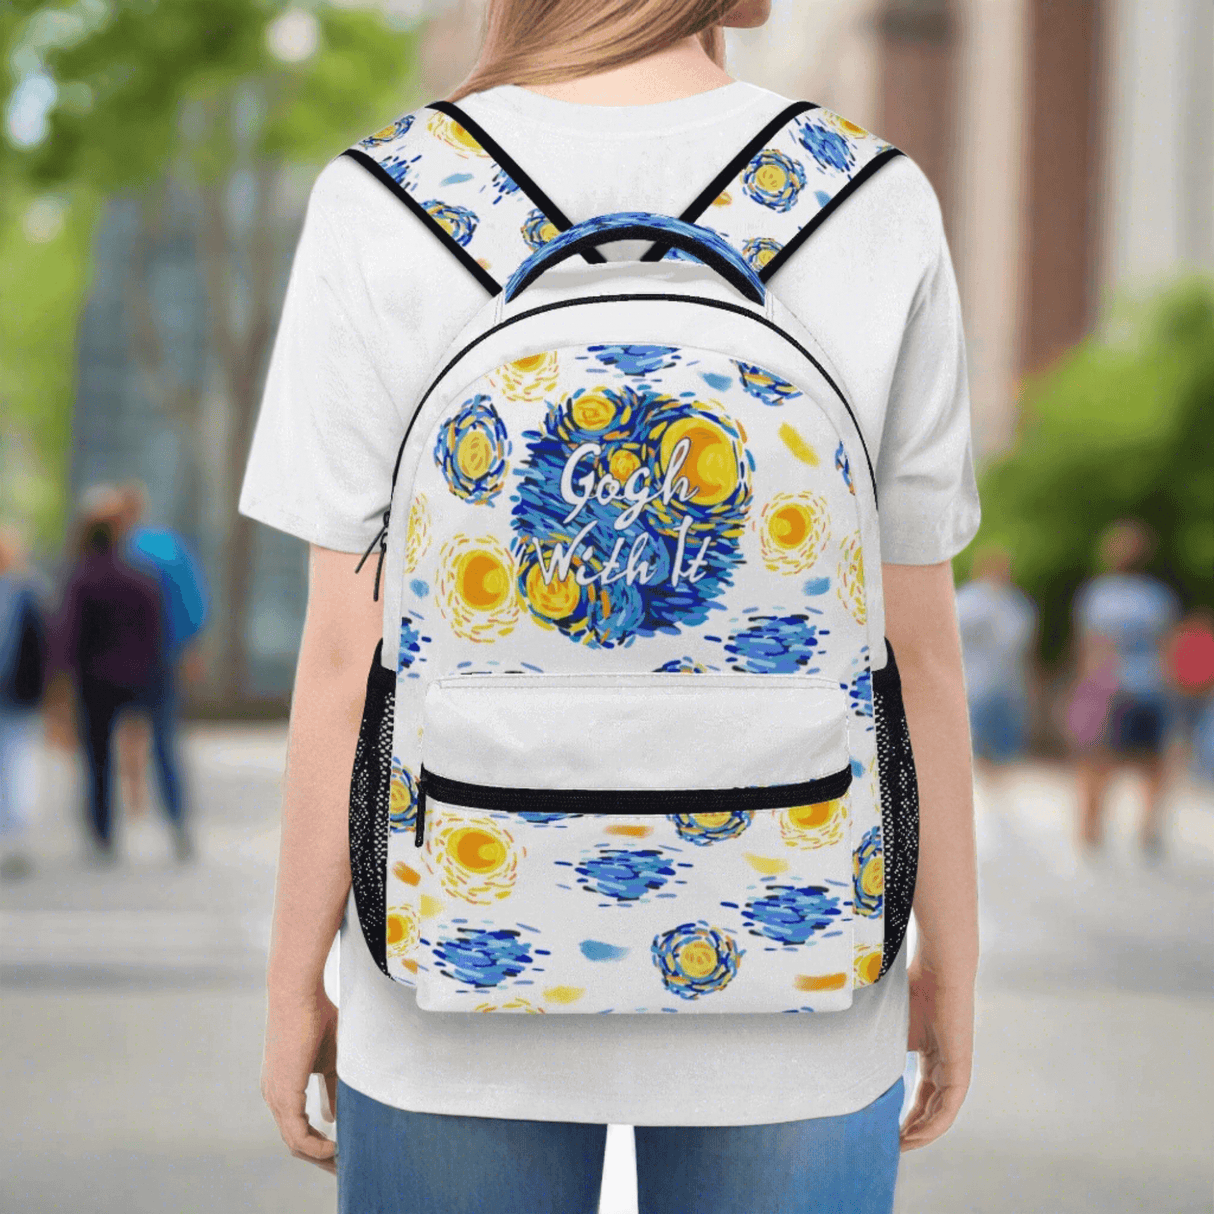 The Starry Night Backpack